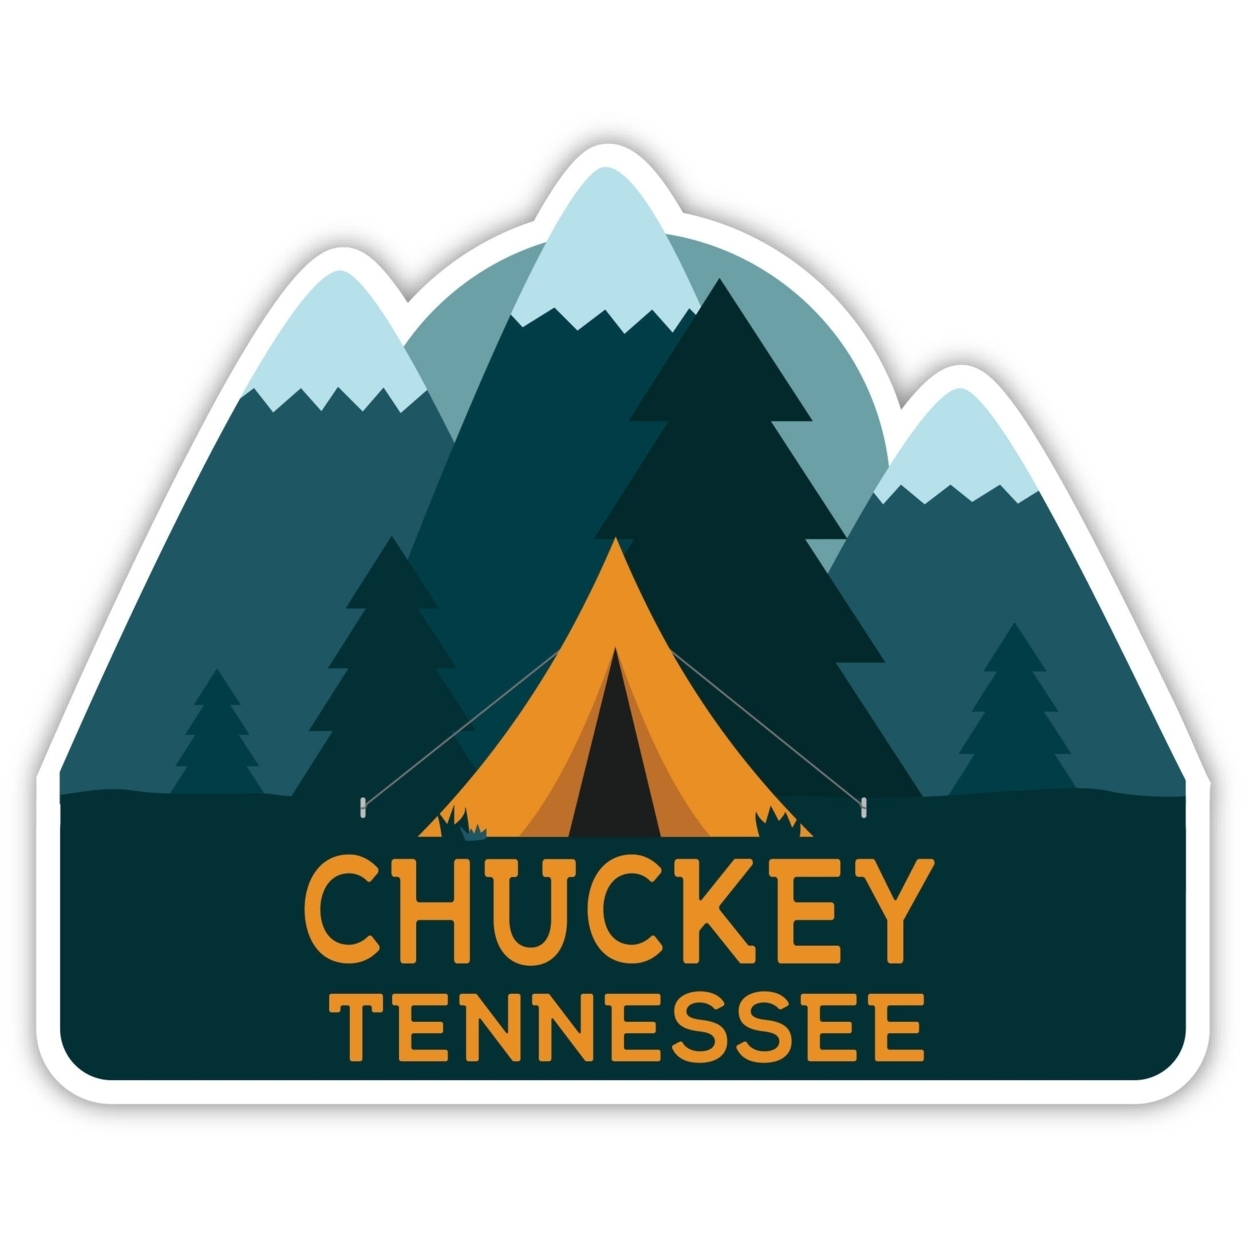 Chuckey Tennessee Souvenir Decorative Stickers (Choose Theme And Size) - 4-Pack, 2-Inch, Tent